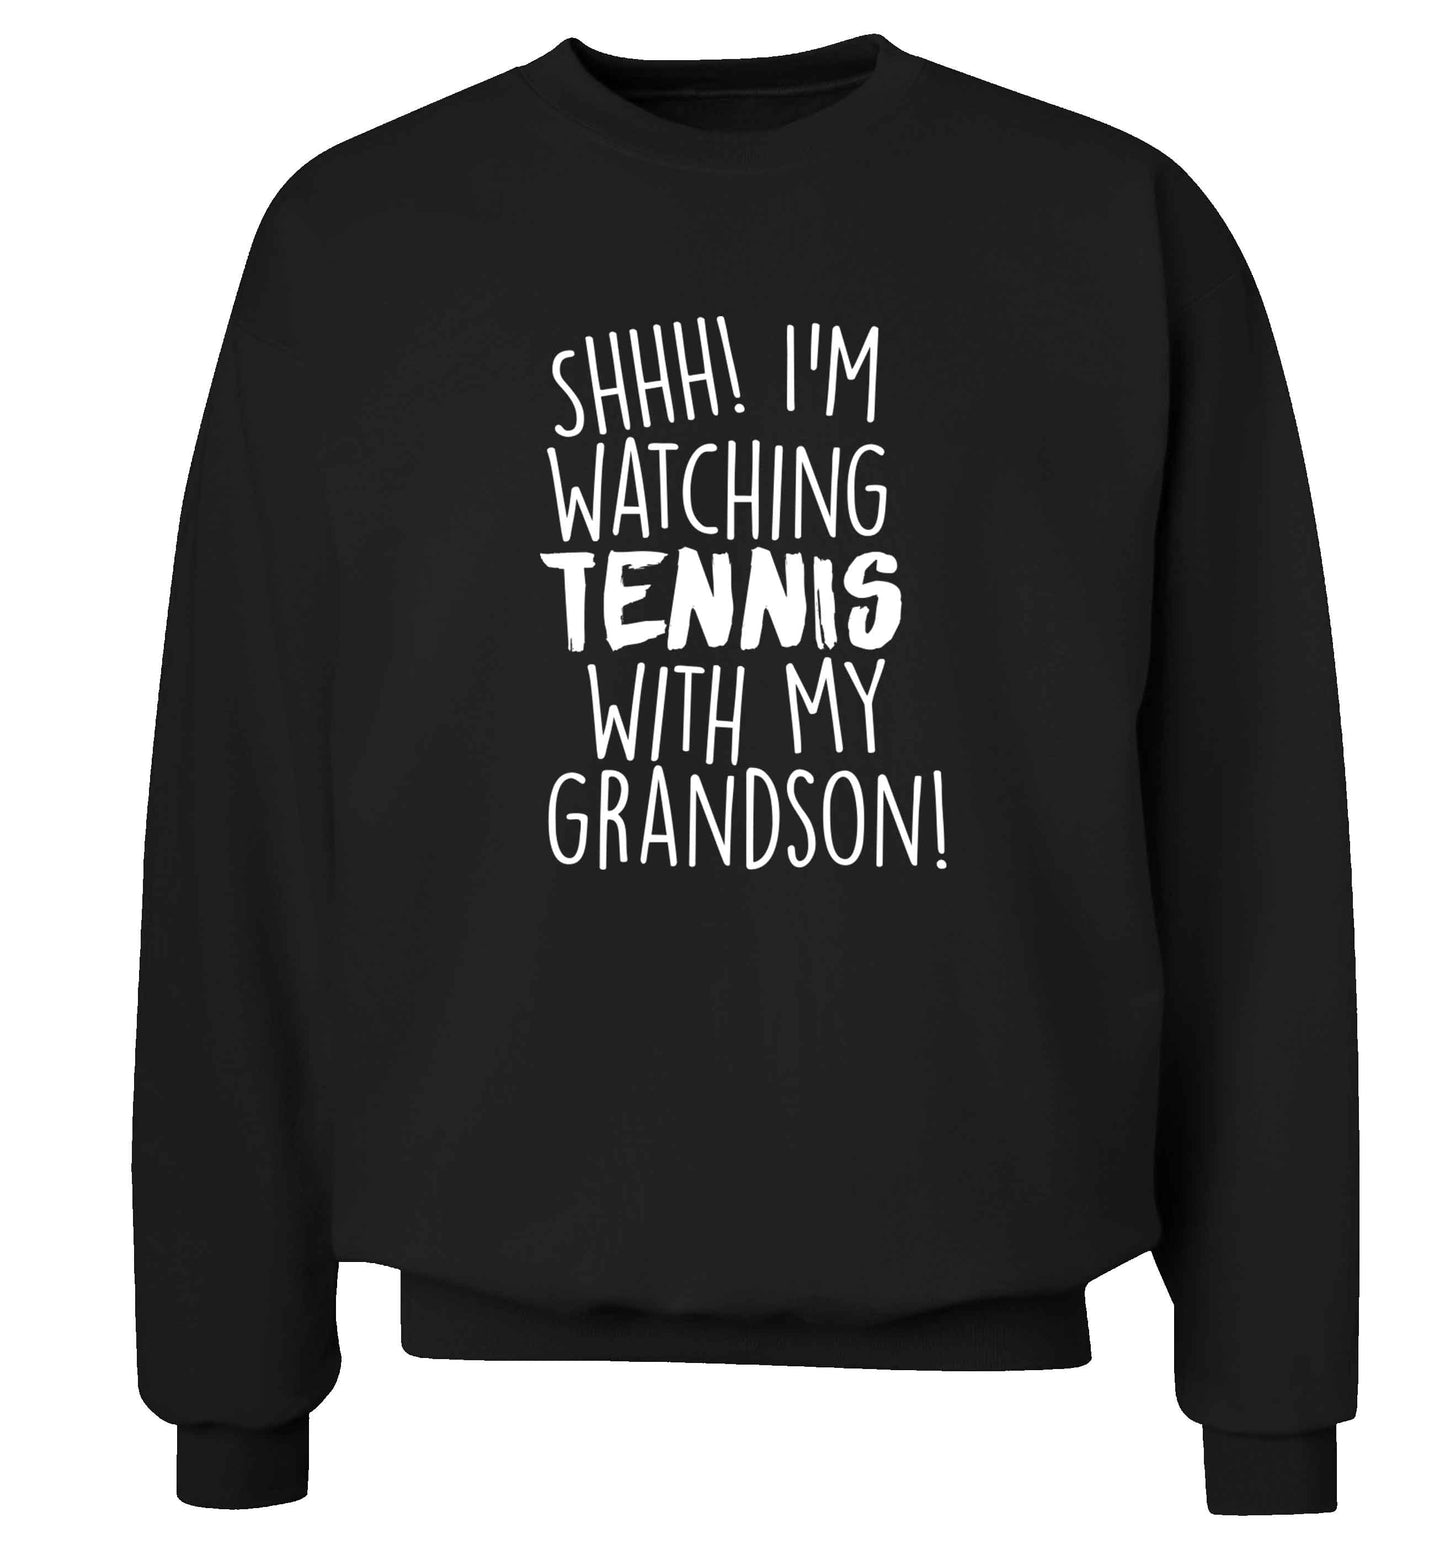 Shh! I'm watching tennis with my grandson! Adult's unisex black Sweater 2XL